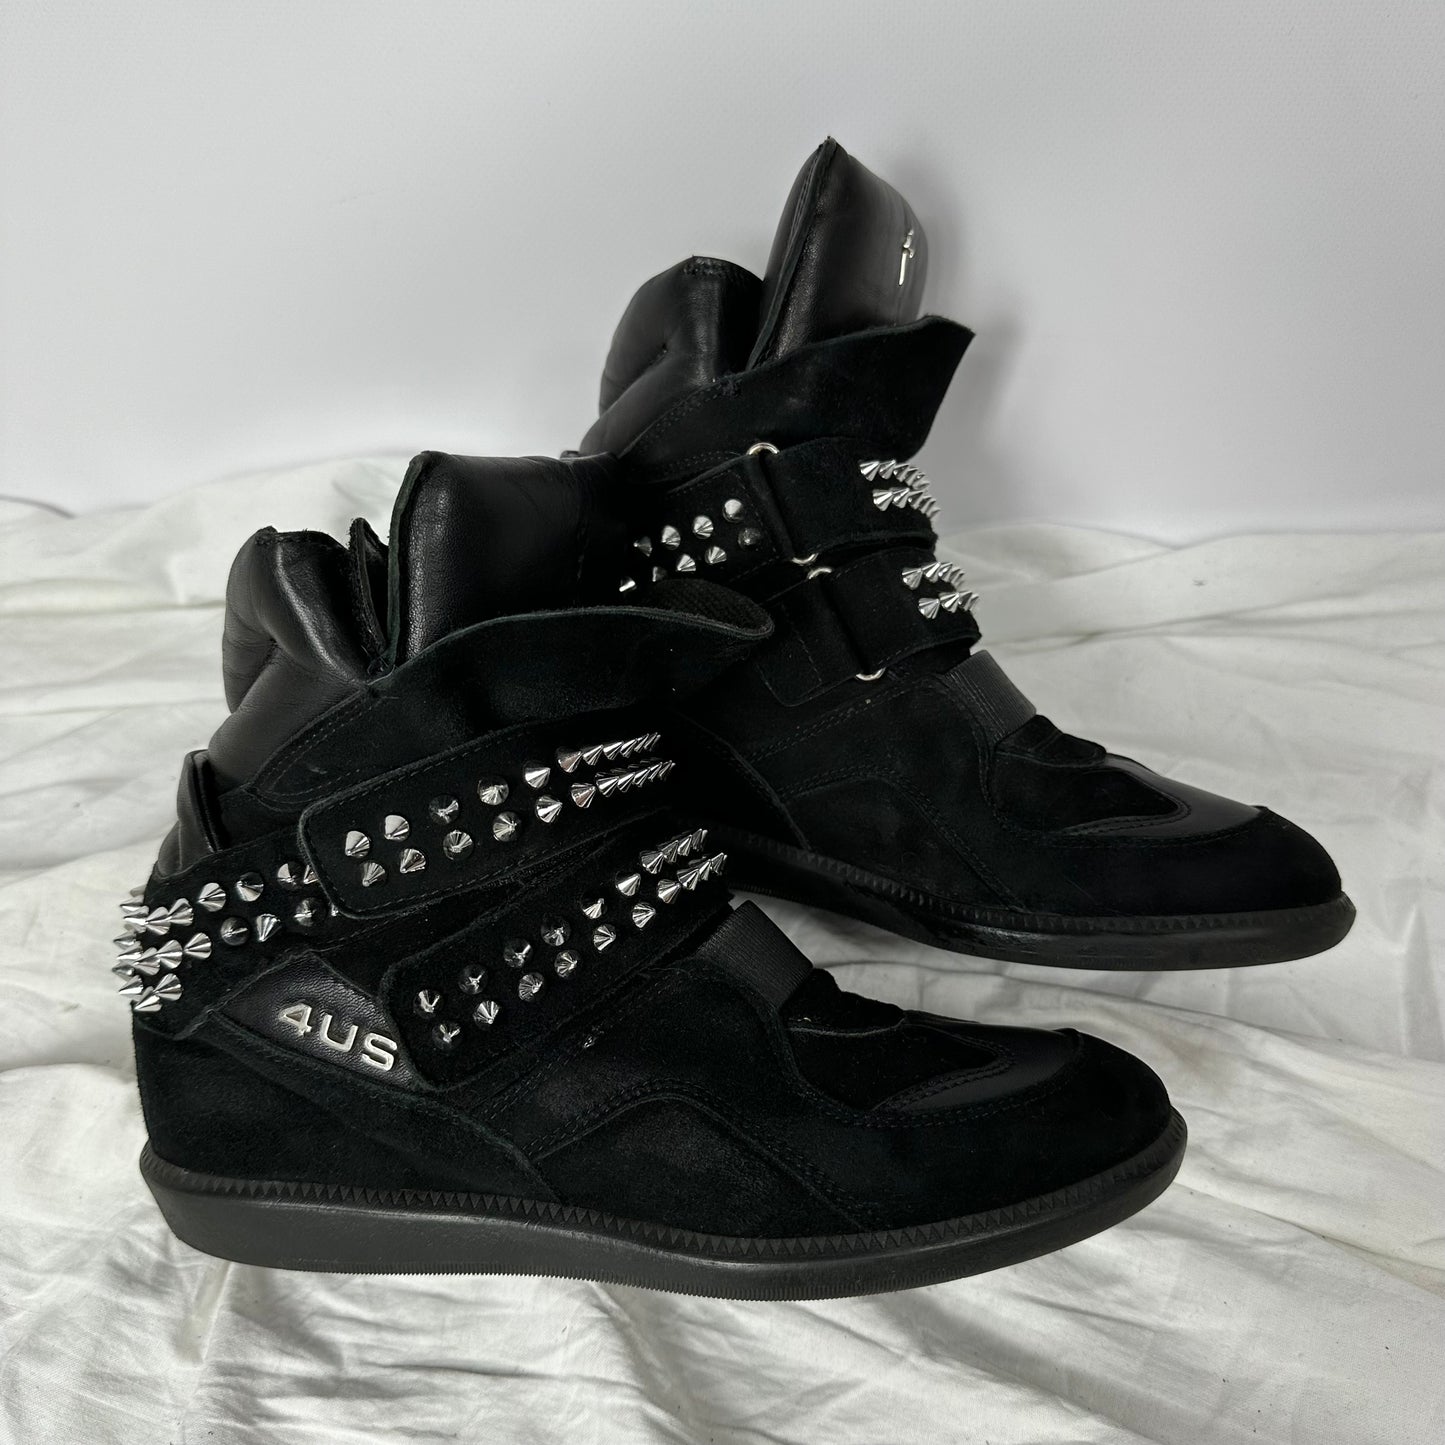 Paciotti Studded Wedge Sneakers 37